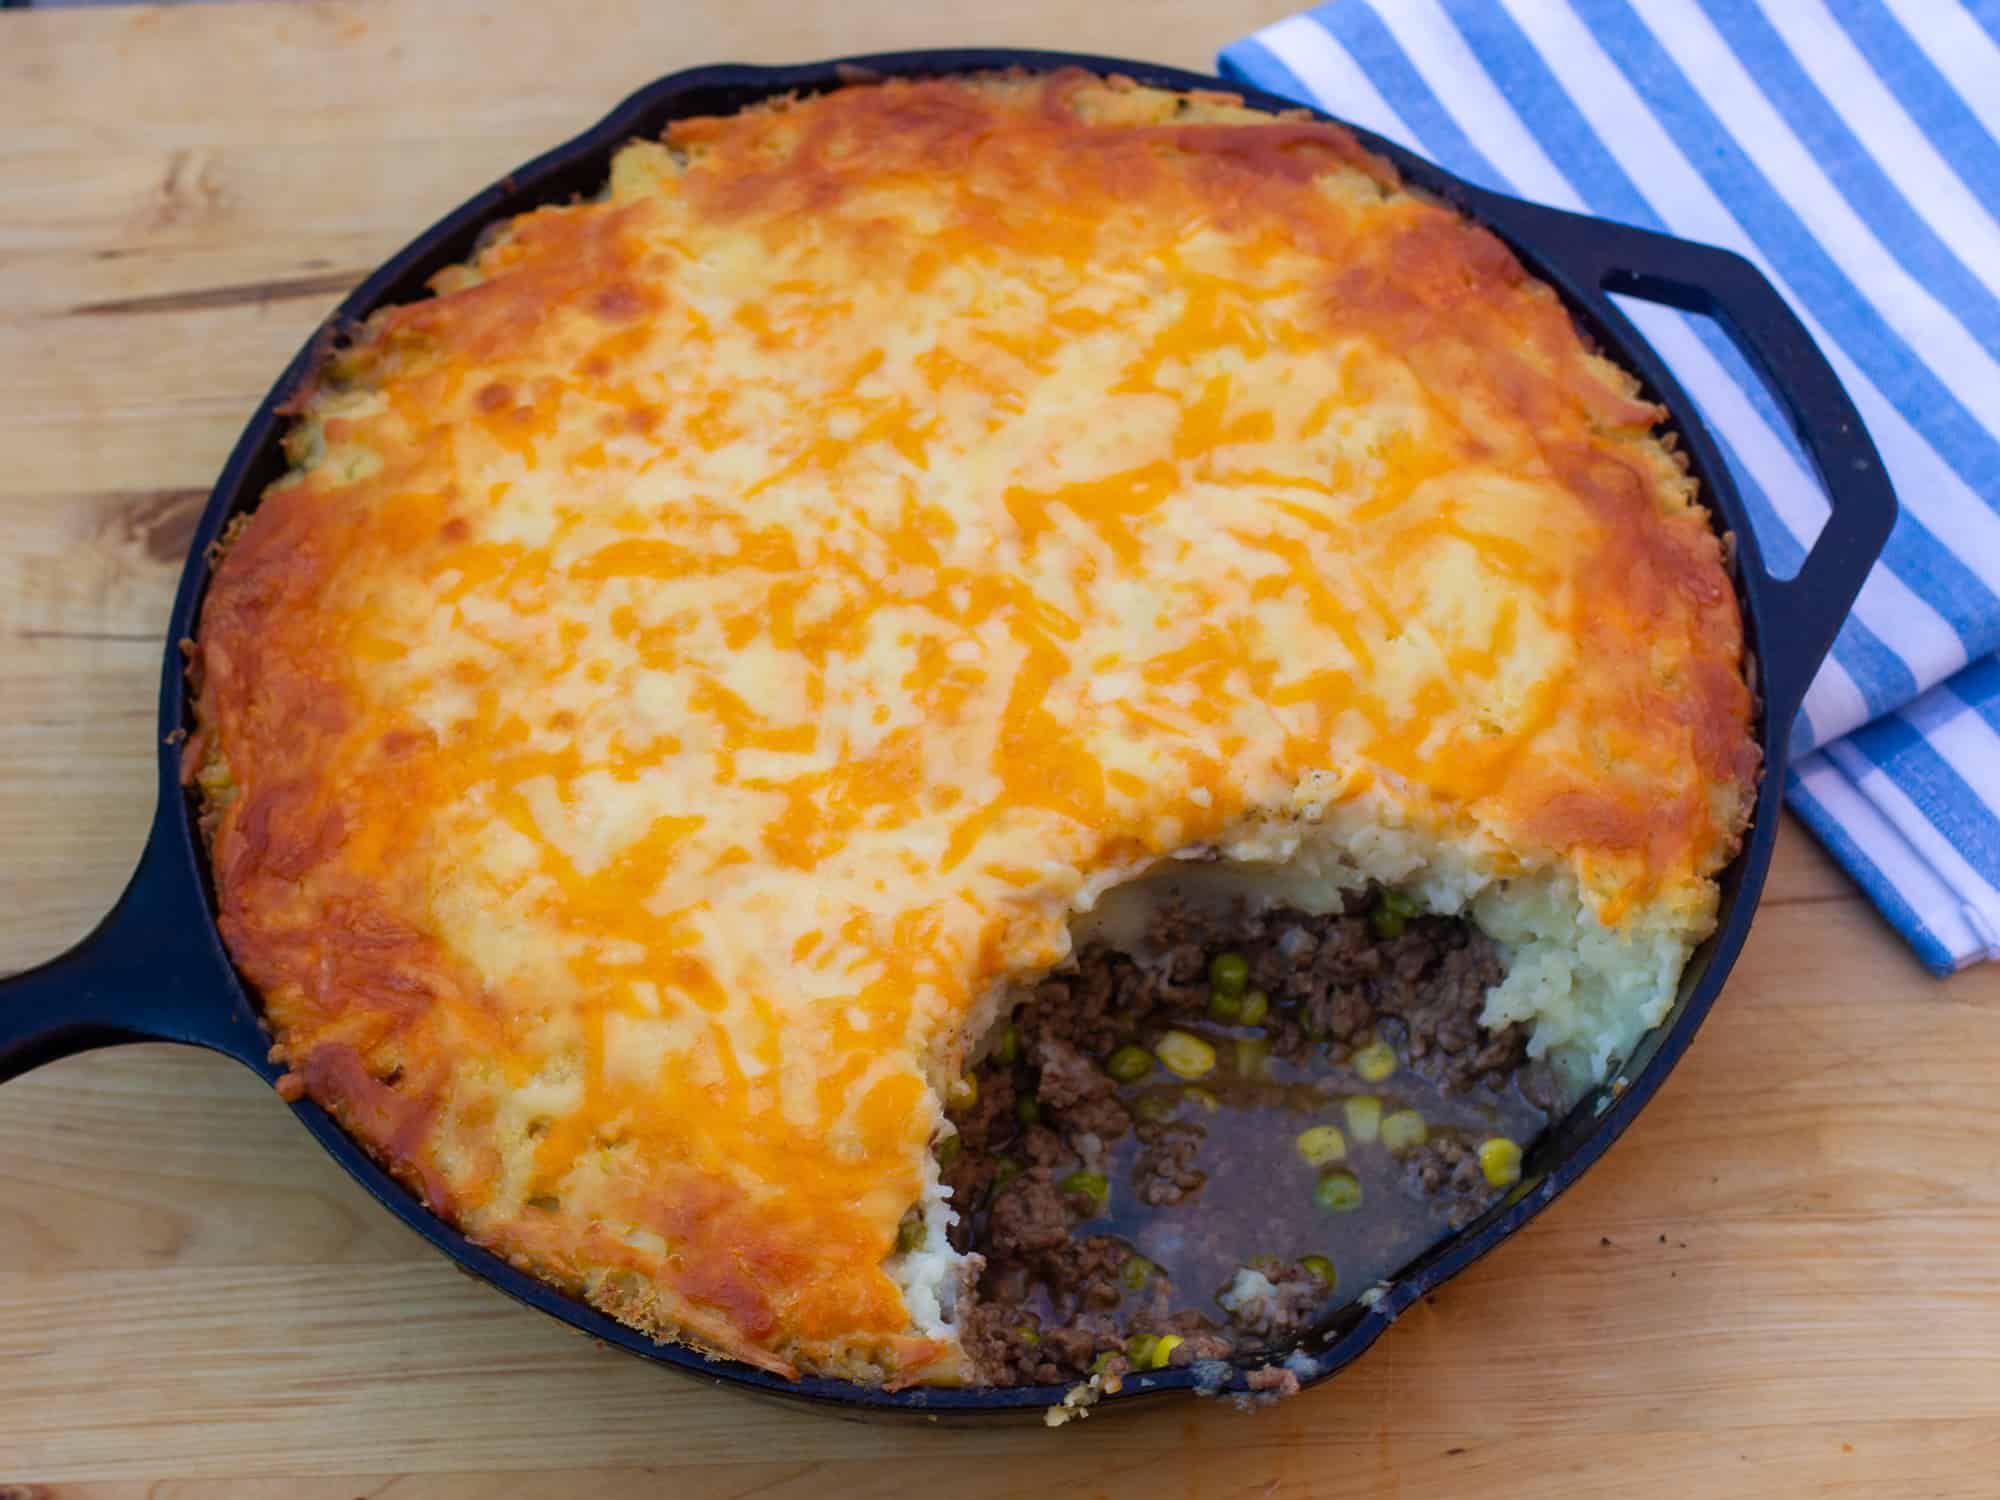 How to make a shepherd's pie in a cast iron skillet